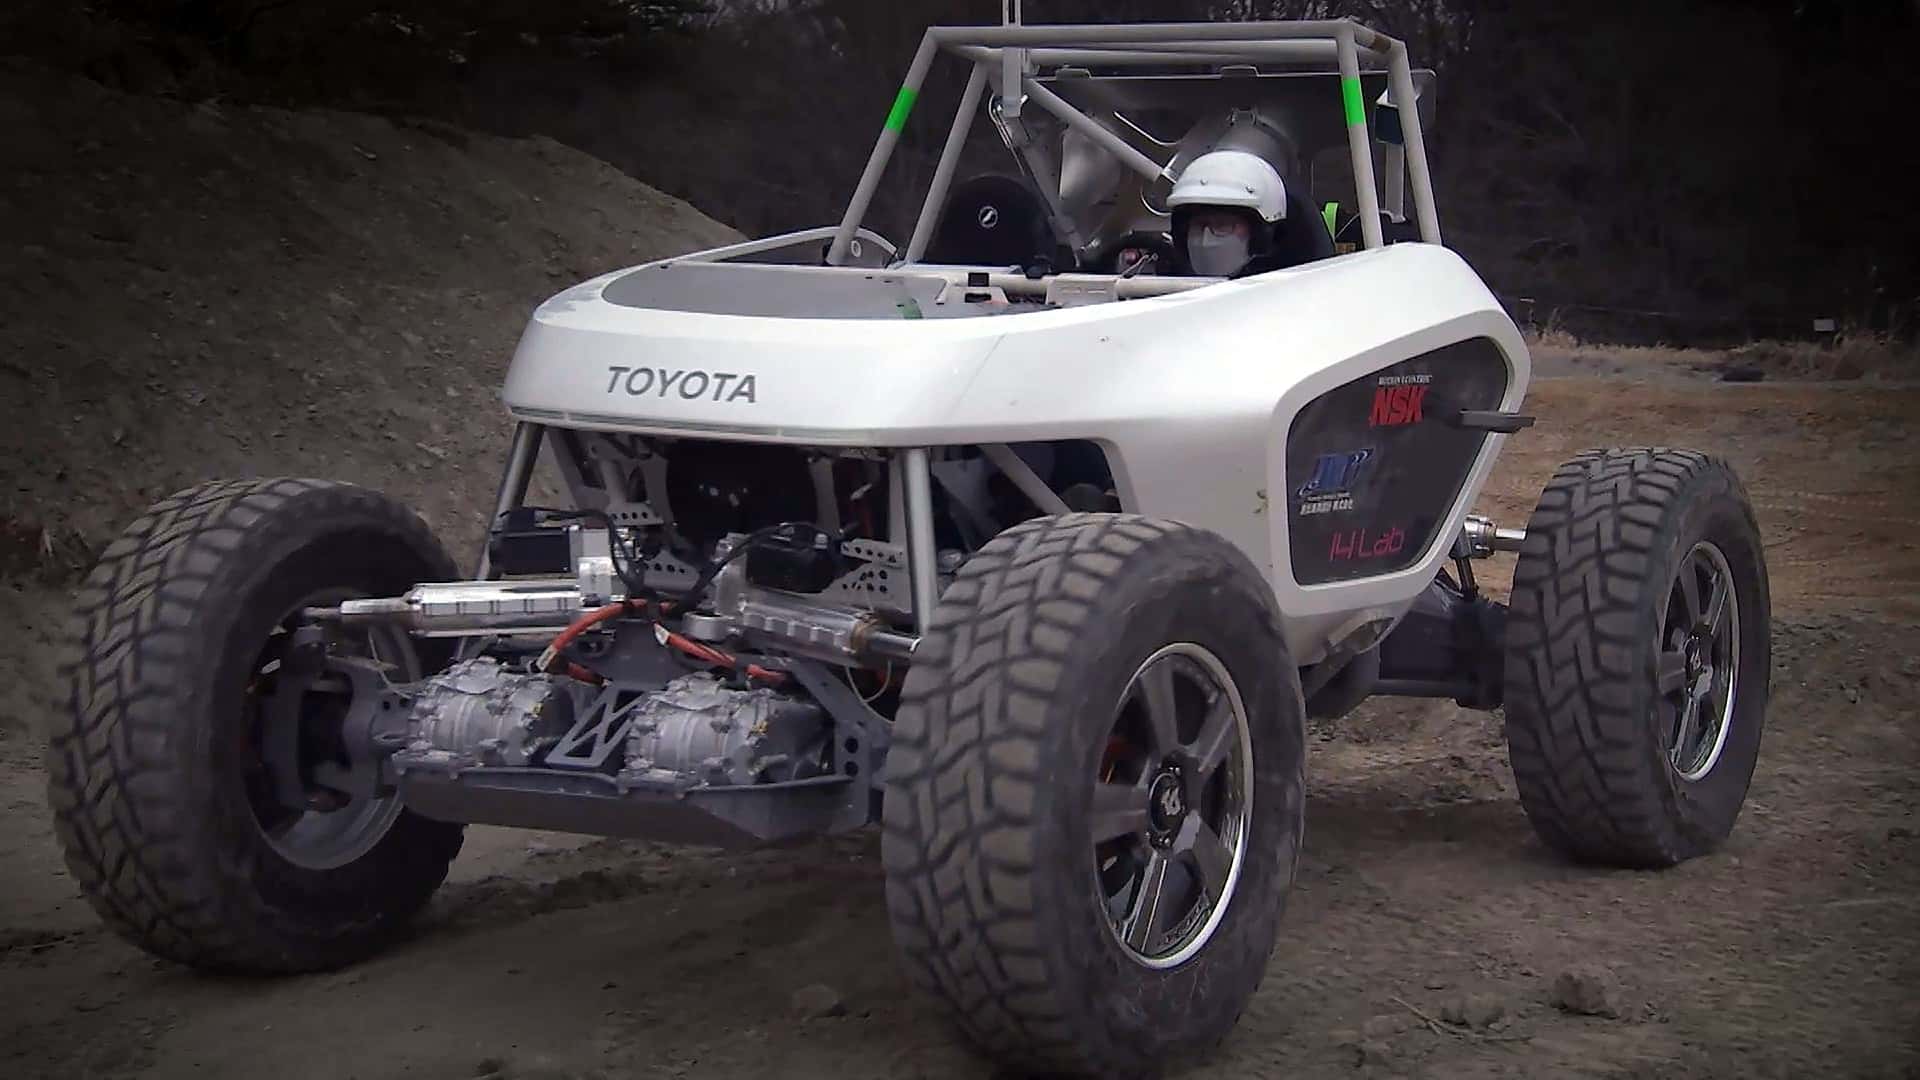 New Toyota Off-Roader With Quad Motors Is Out Of This World